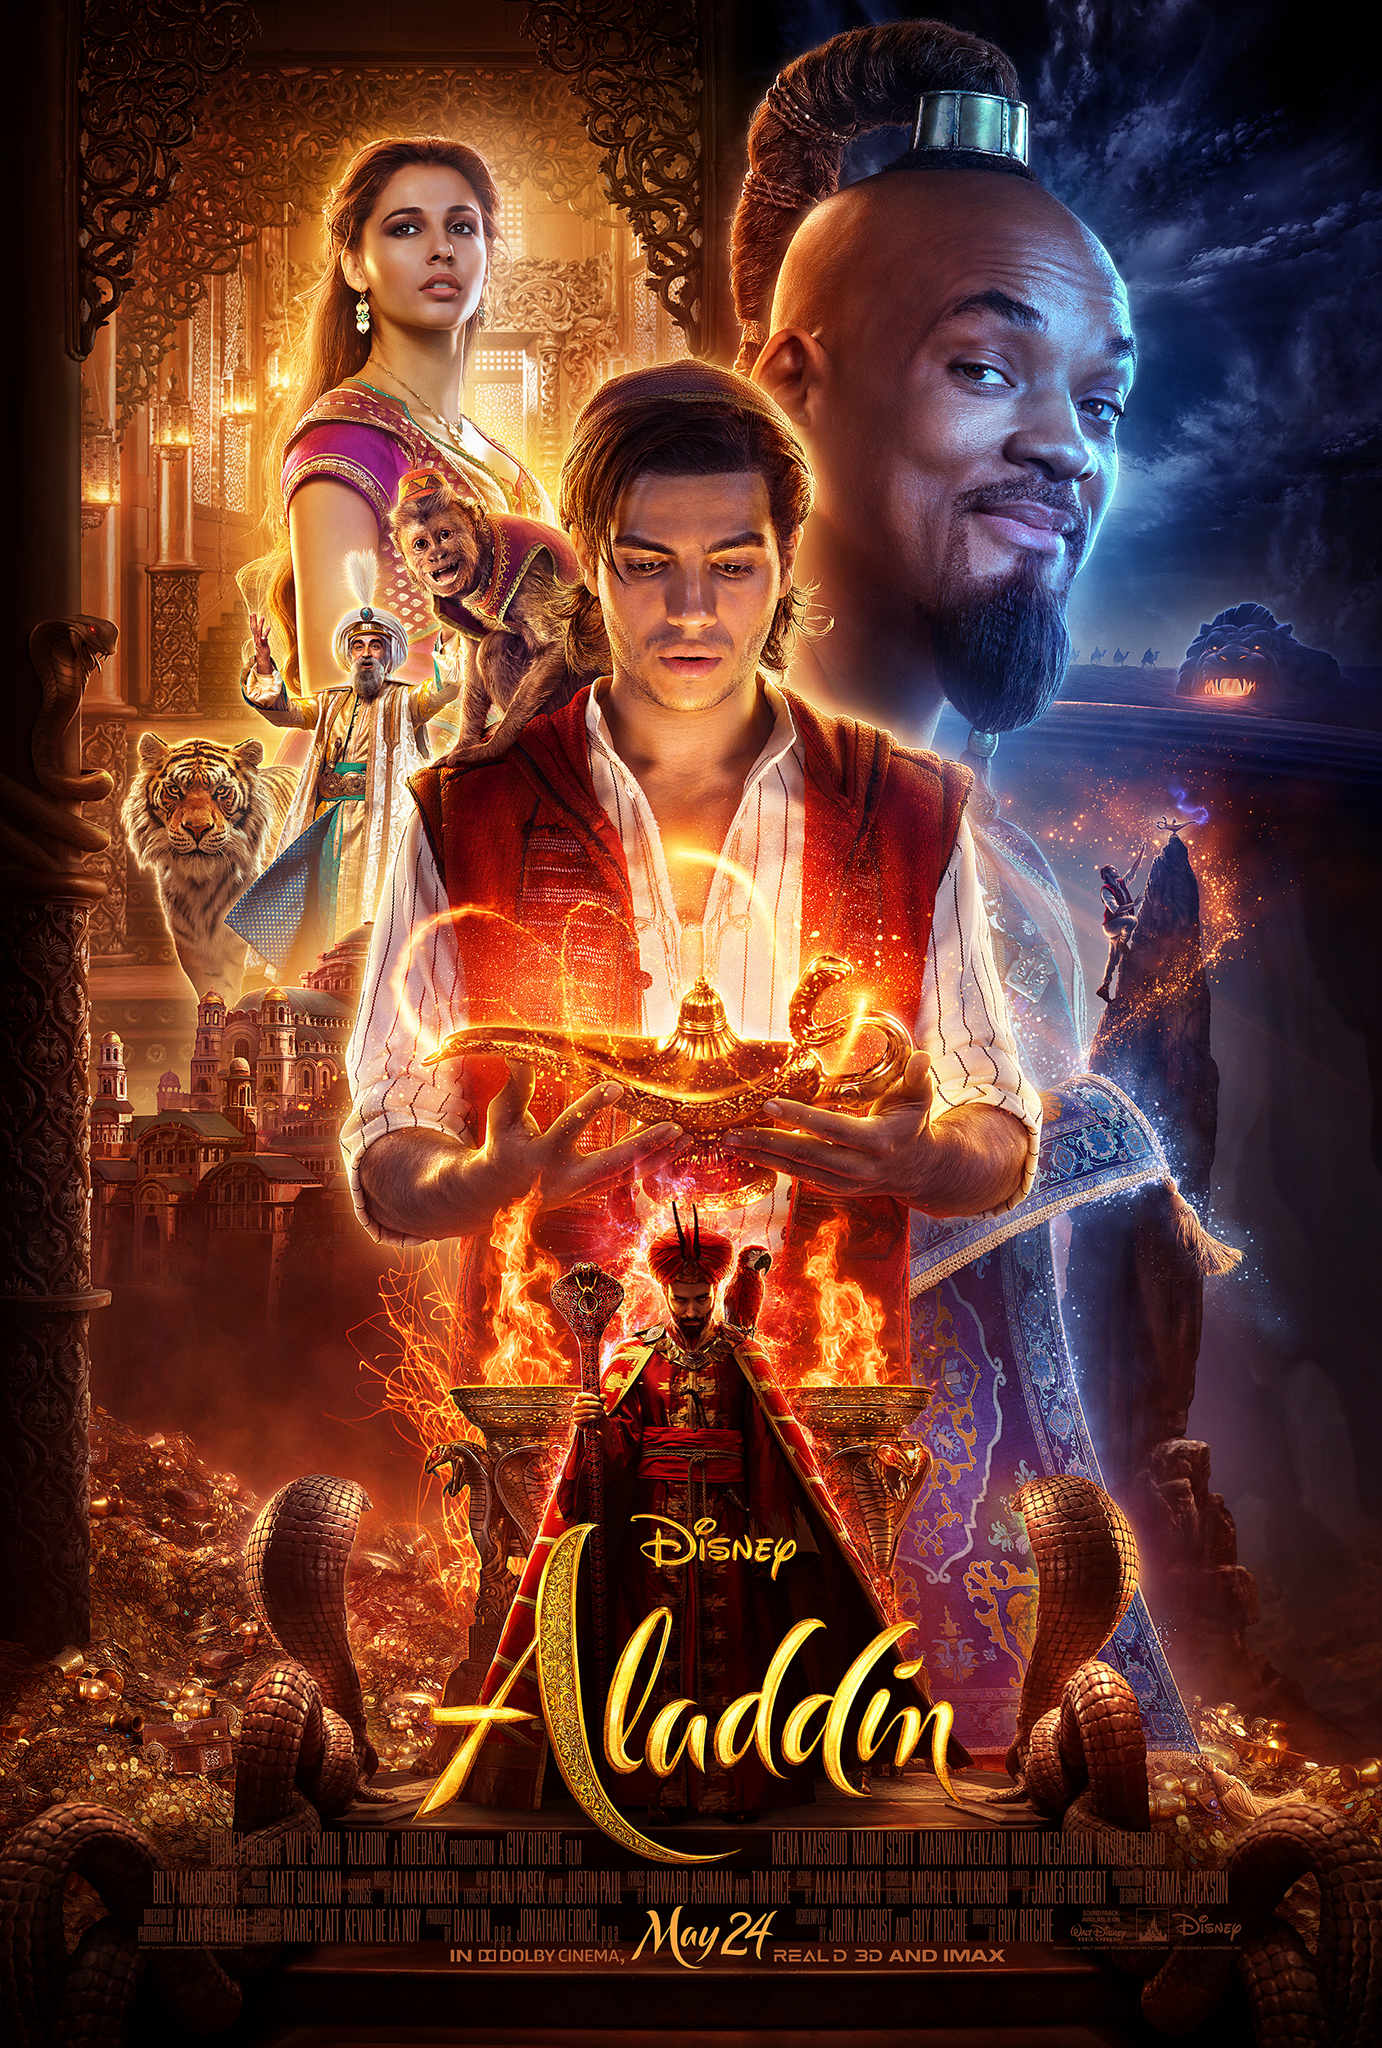 Aladdin – Live Action Take on an Animated Disney Classic!